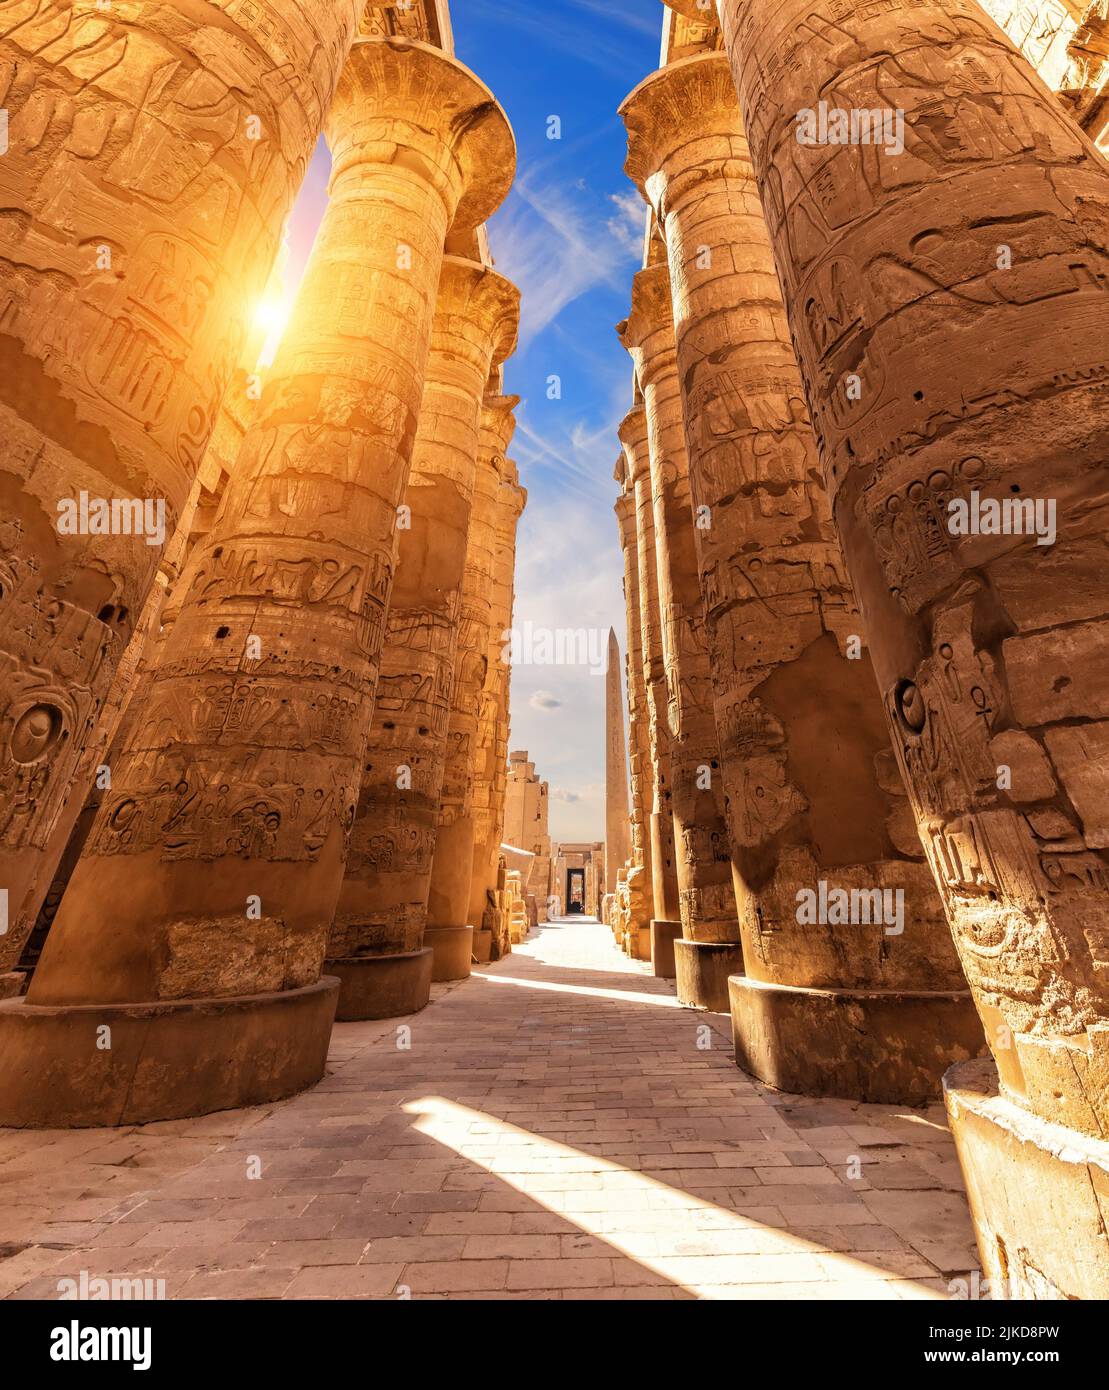 Columns with ancient carvings in the Great Hypostyle Hall of Luxor, Karnak Temple, Egypt. Stock Photo